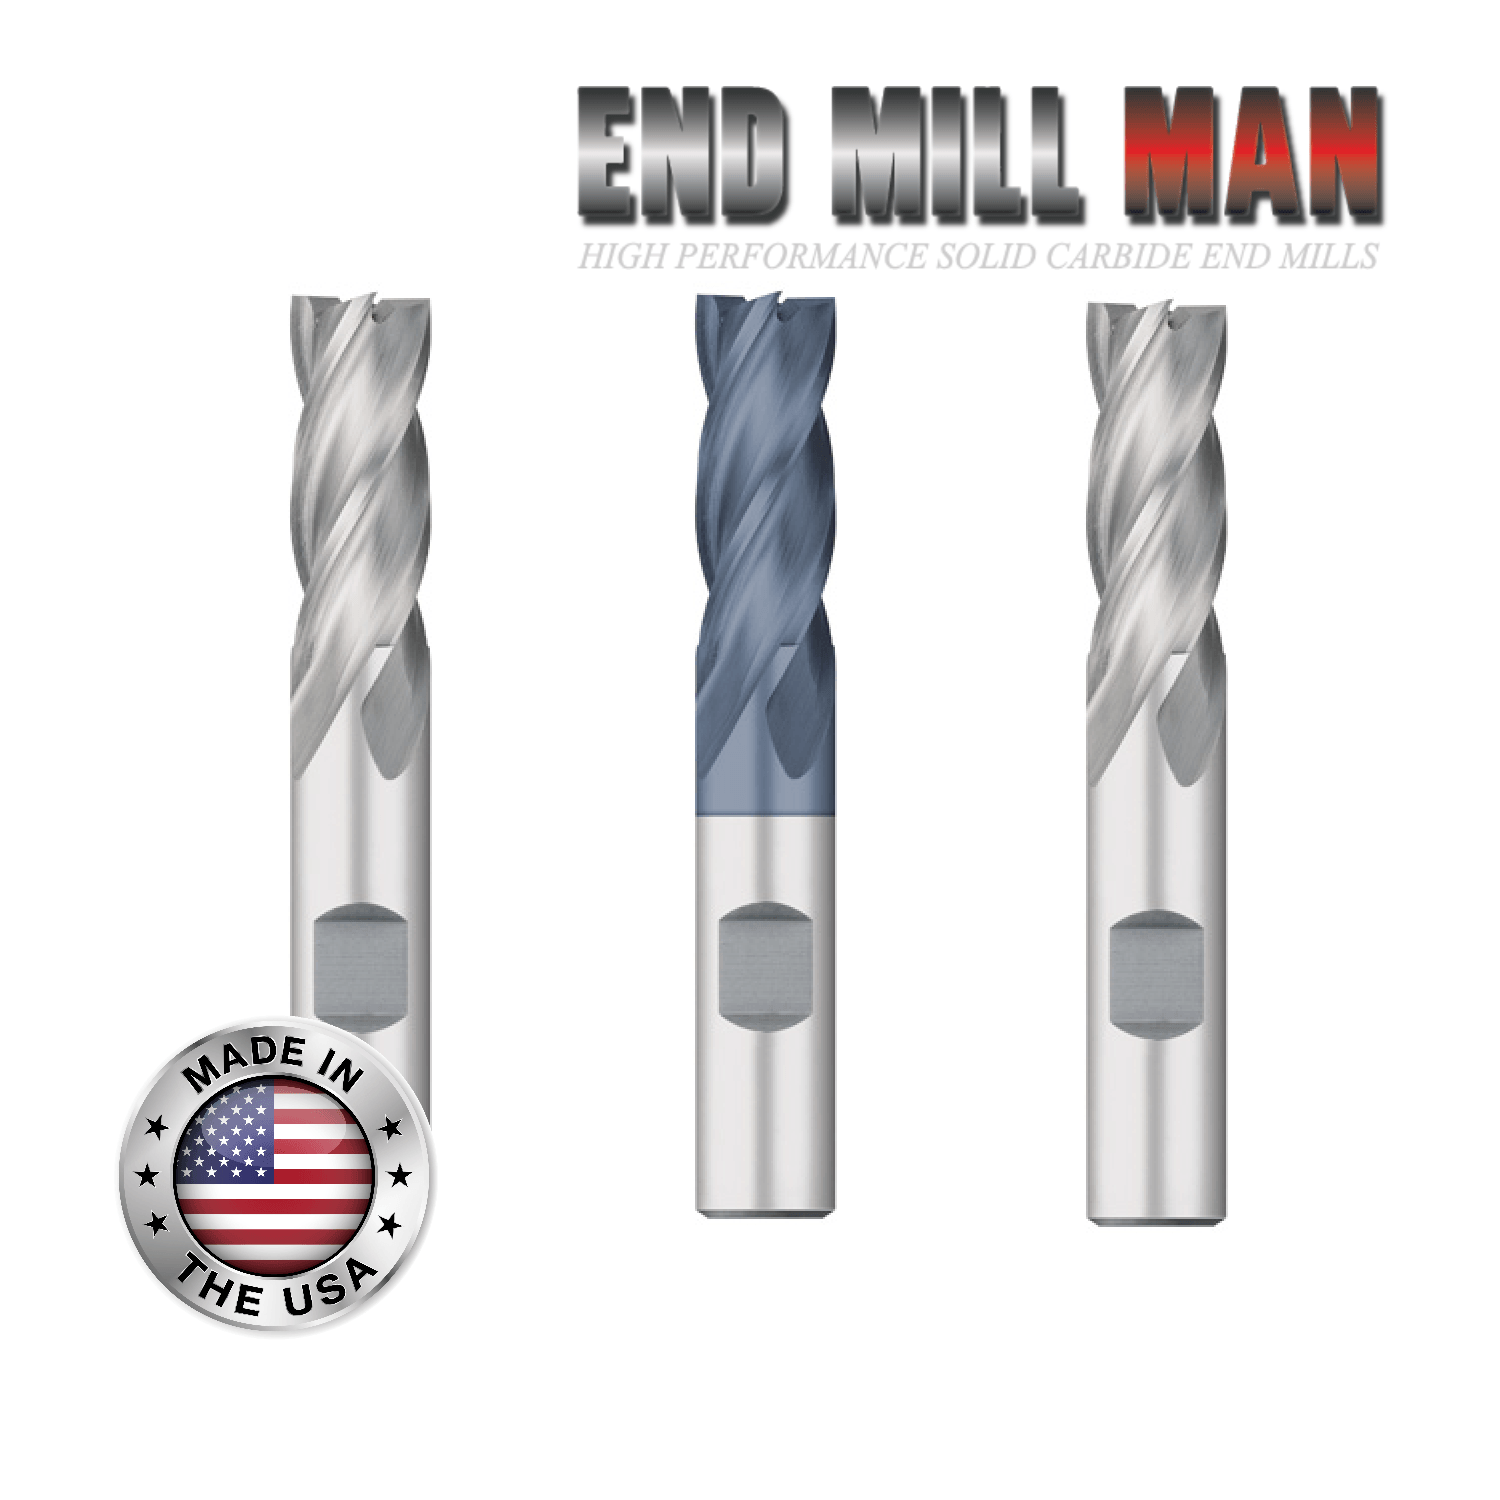 1/2" x 1-1/4" LOC (3 Pack) HSS 4 Flute End Mills (1/2" Shanks) - The End Mill Store 